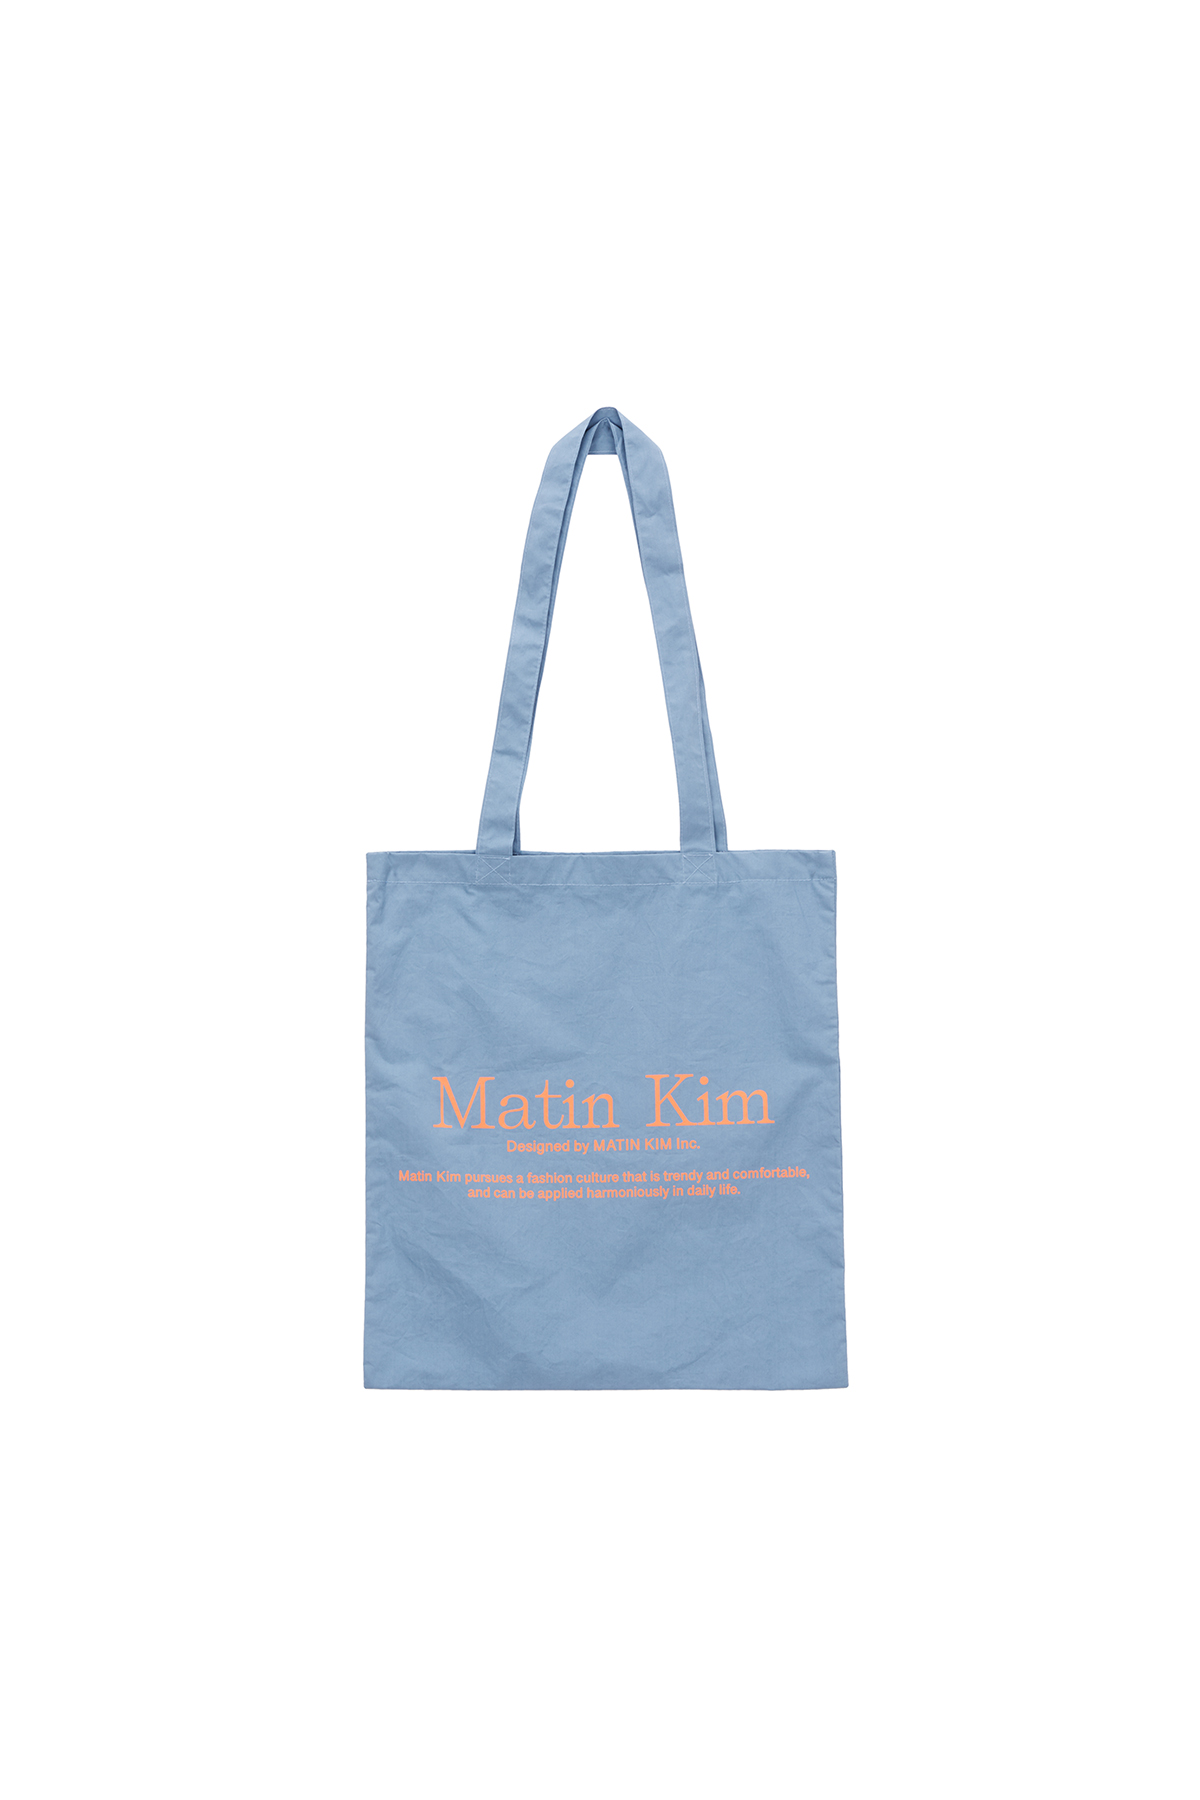 Matin Kim Shopper Bag!!✨ Street style big volume reusable bag. Available in  4 color! 💰RM85 Size: 63 x 40 x 20cm 🇰🇷 ALL FROM KOREA 🛒…